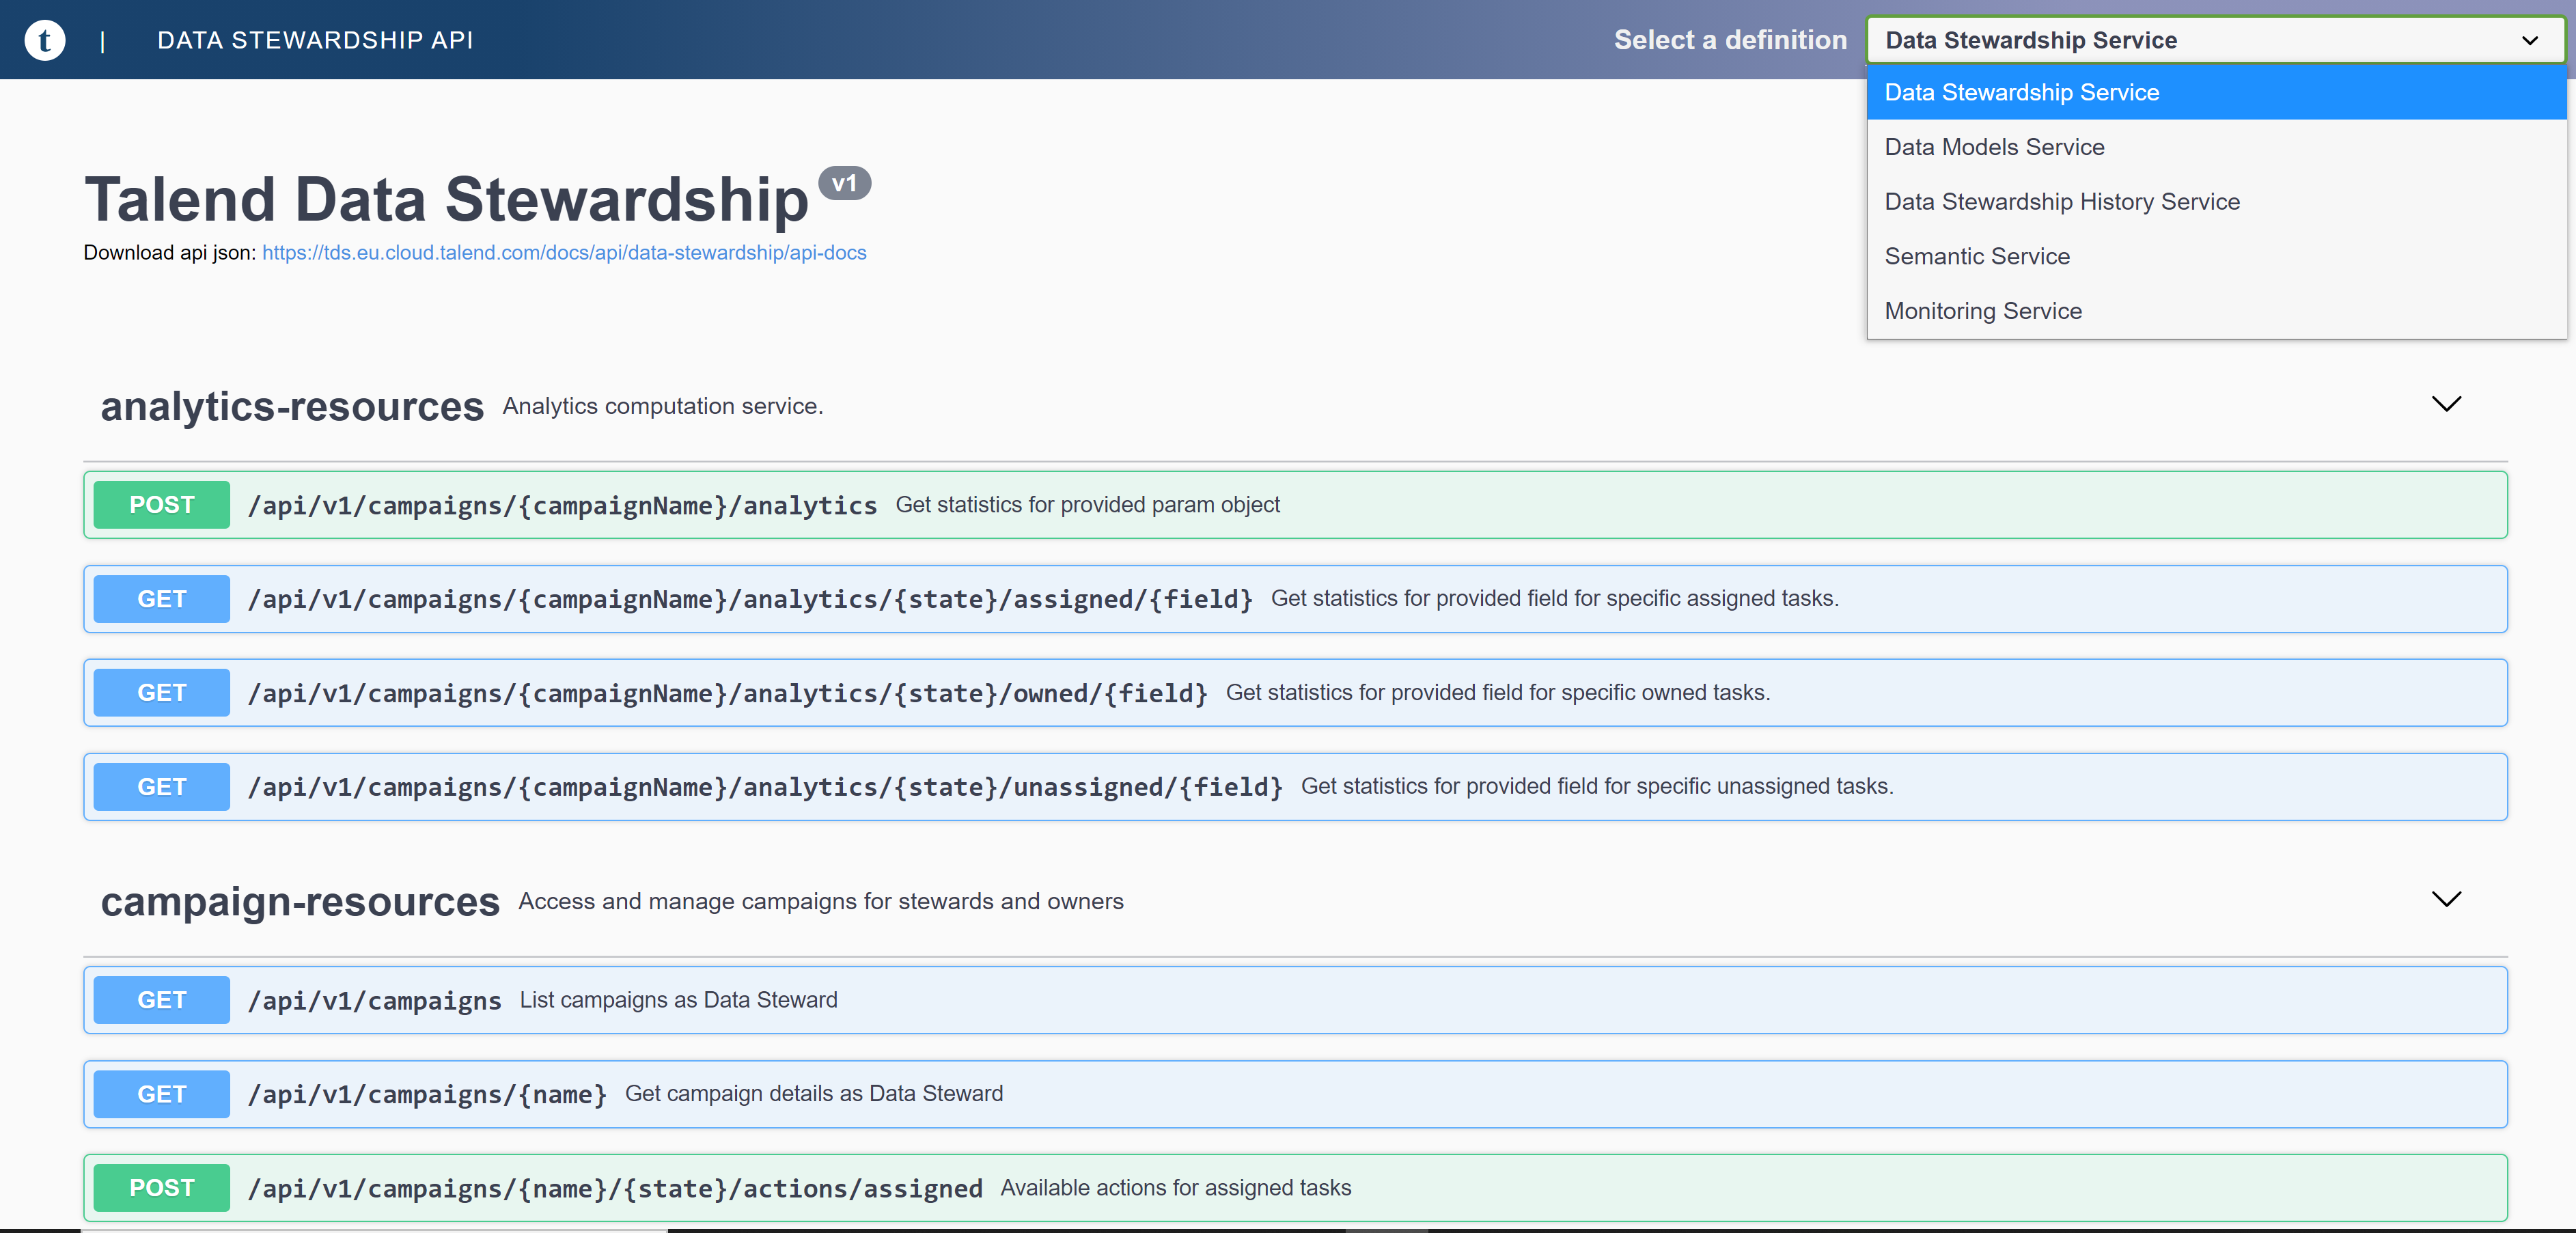 Categories and operations for Talend Data Stewardship REST API documentation.